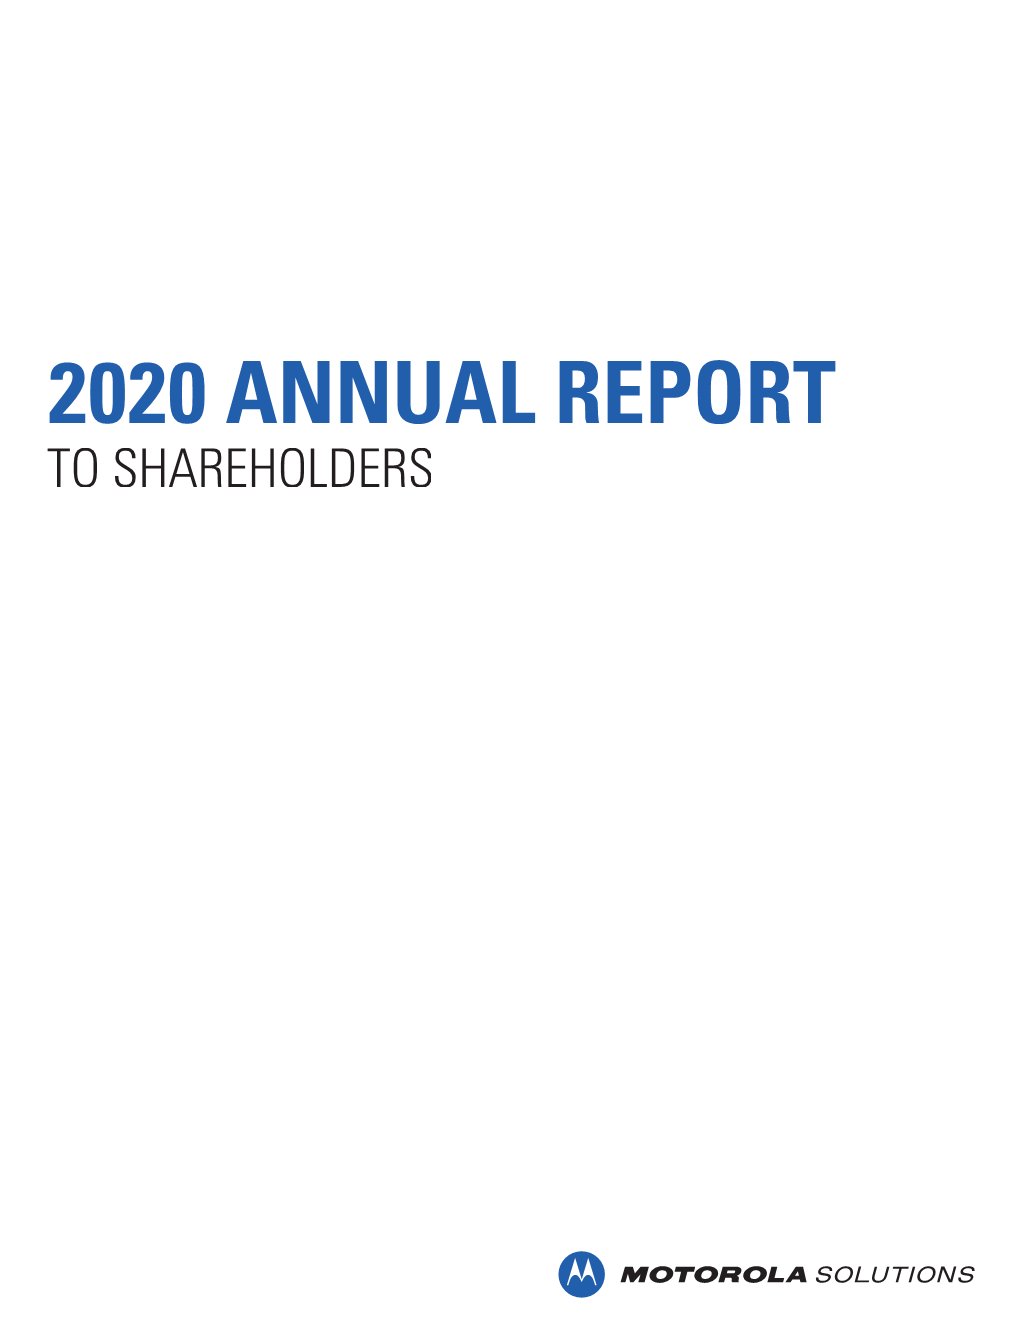 2020 Annual Report to Shareholders